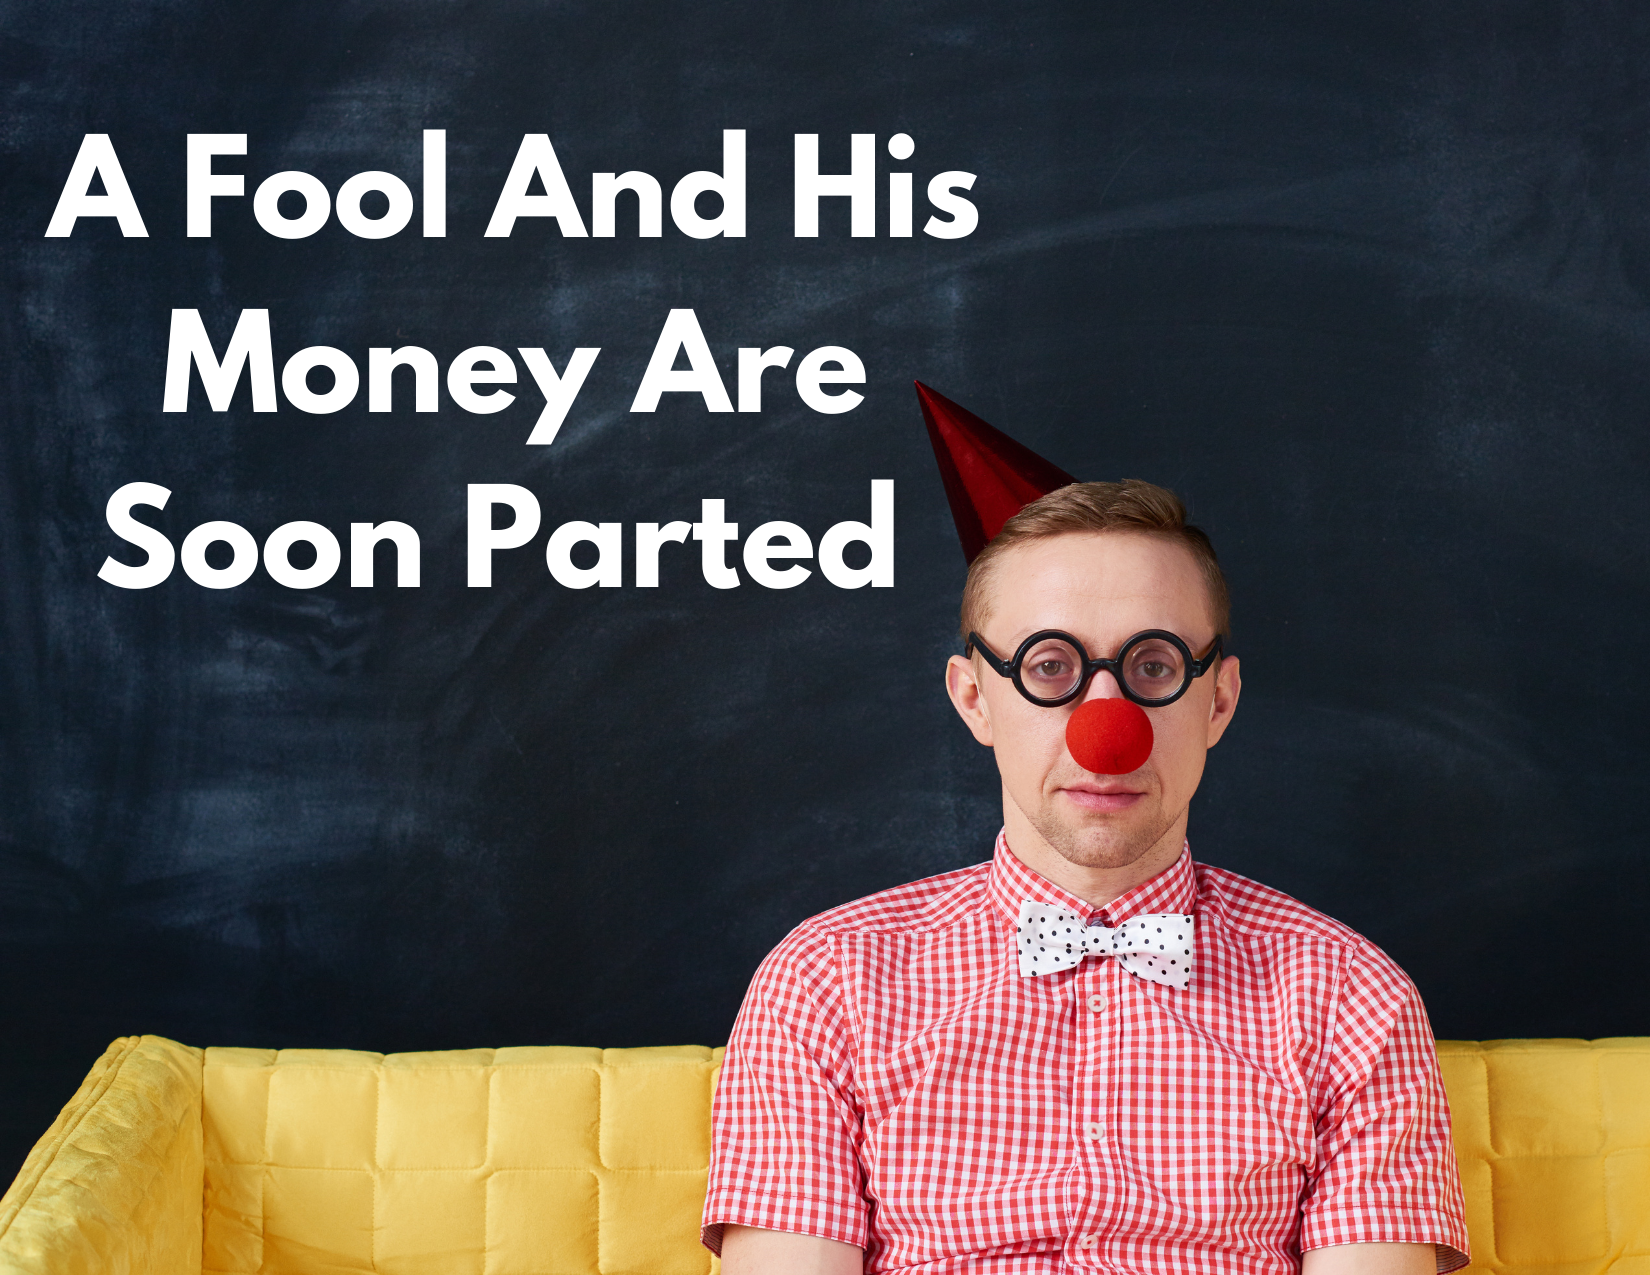 A picture of a man with a red nose and a clown hat, sitting on a couch with the words "A fool and his money are soon parted"